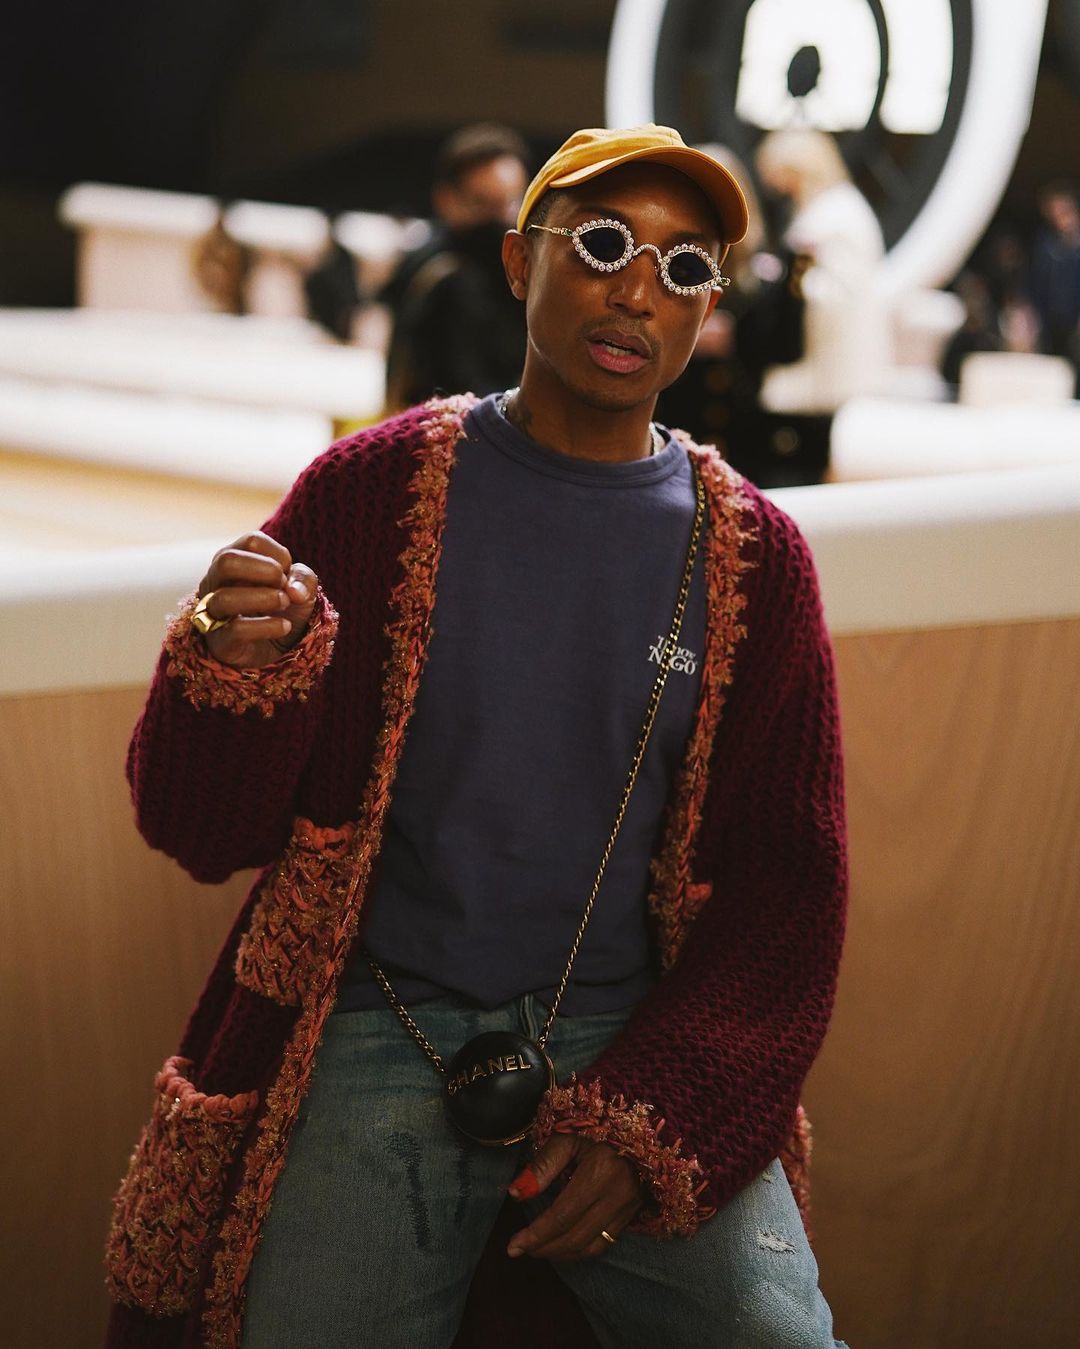 Pharell Williams x Tiffany & Co. sunglasses called out for copying antiques